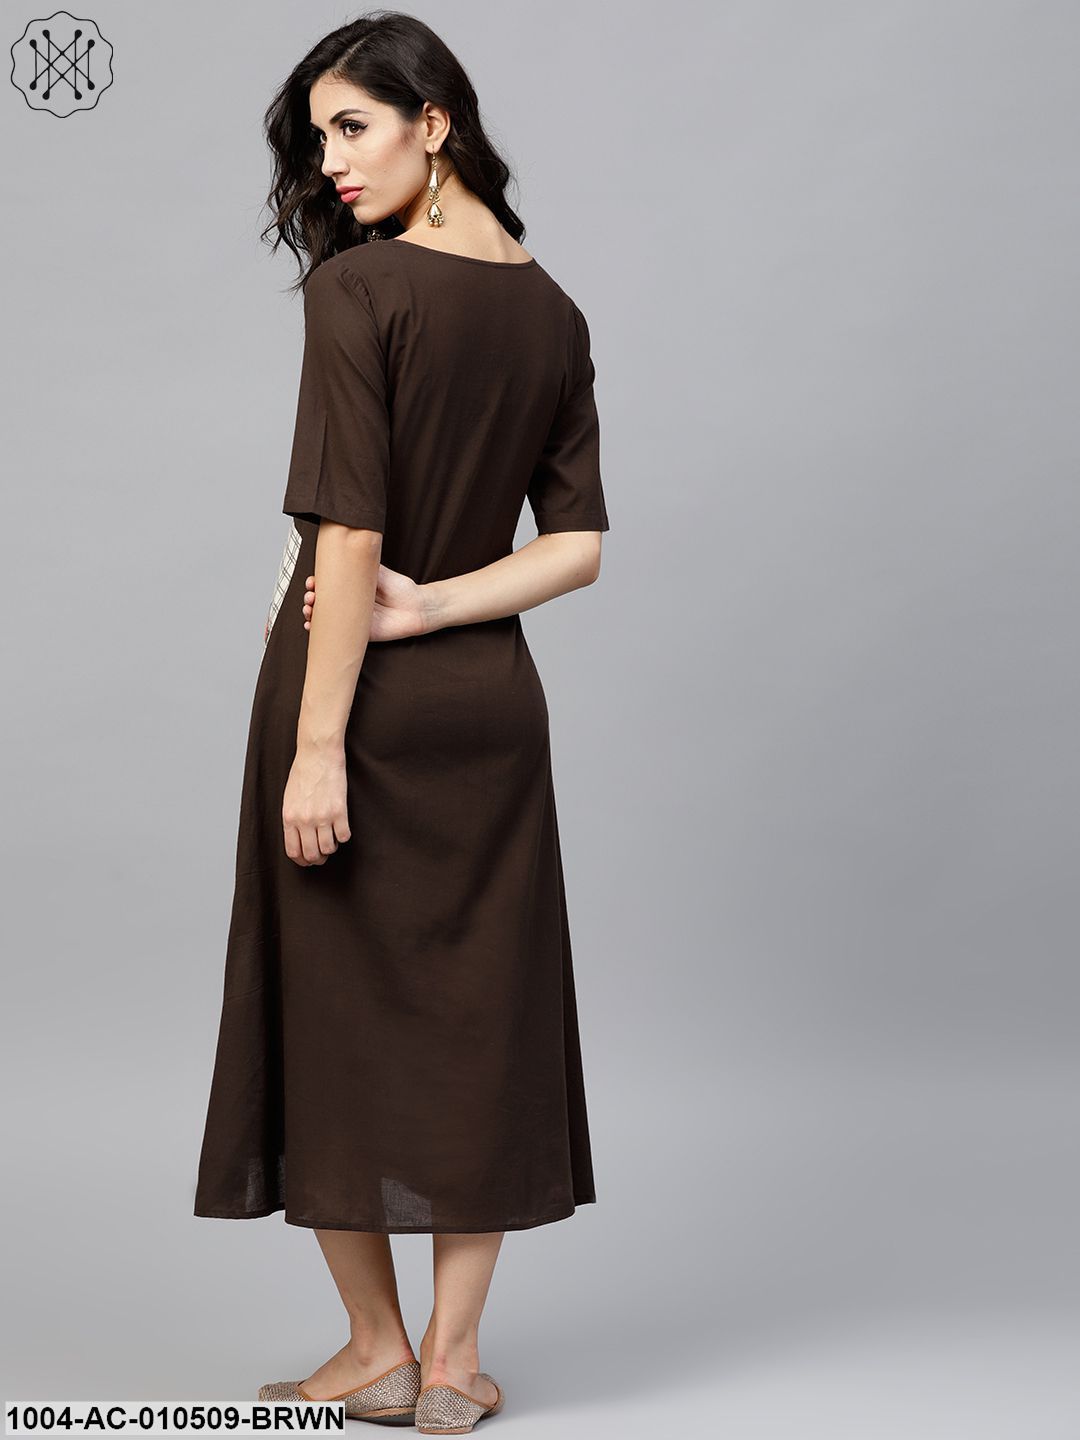 Dark Brown A-Line Dress With Front Patch Pockets And Half Sleeves